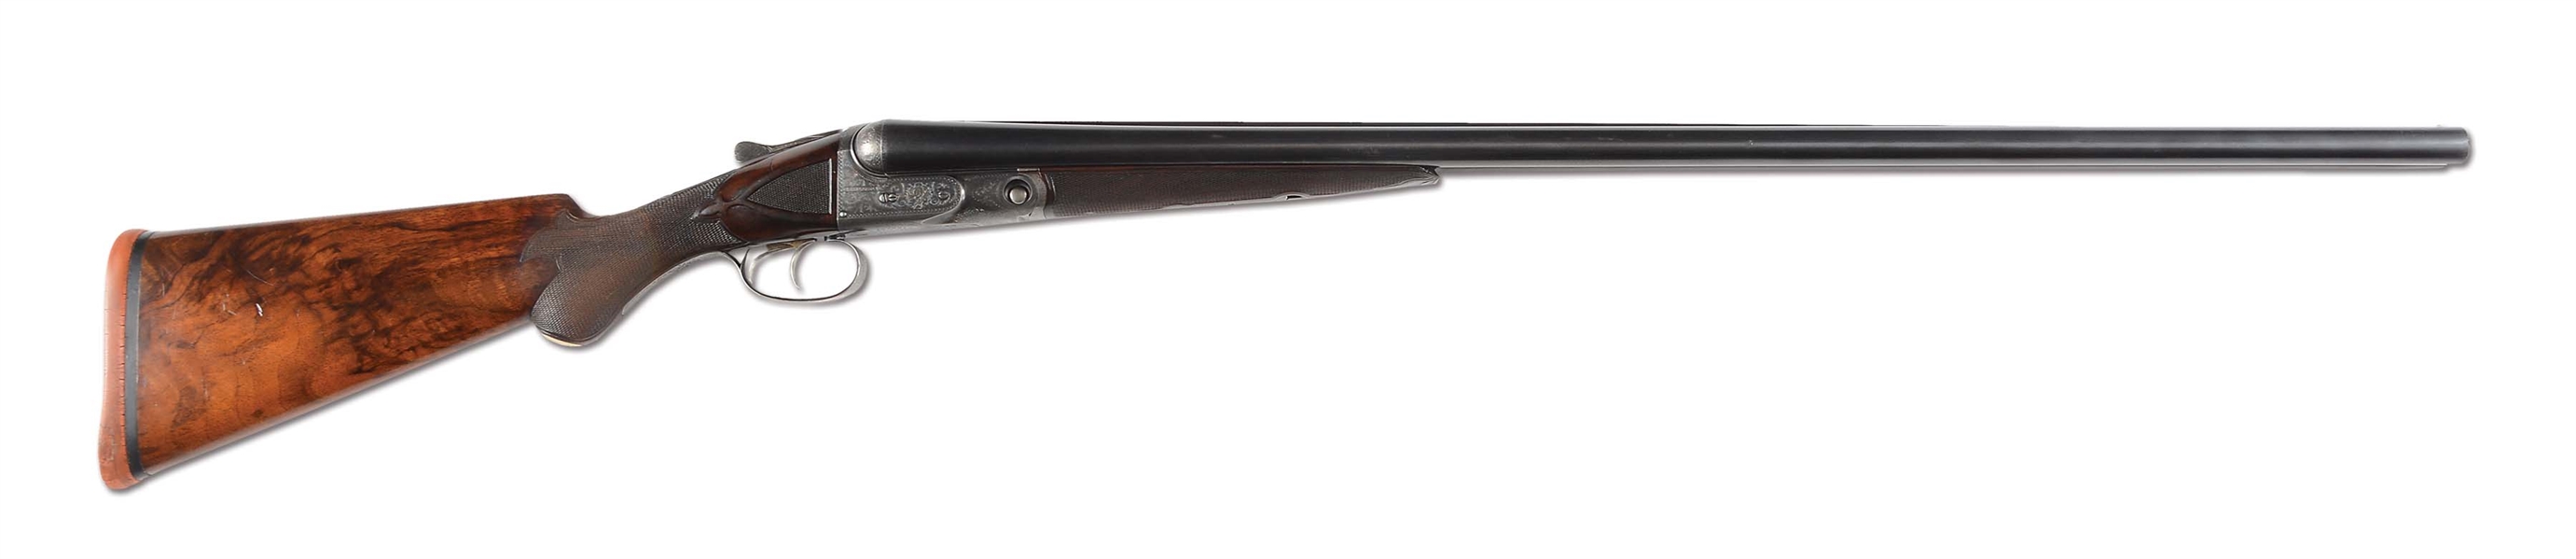 (C) RARE PARKER "AH" TARGET SHOTGUN WITH UNUSUAL ENGRAVING, SOLD BY ARTHUR DUBRAY, WITH FACTORY LETTER- 1 OF 6 MADE WITH TITANIC STEEL BARRELS.